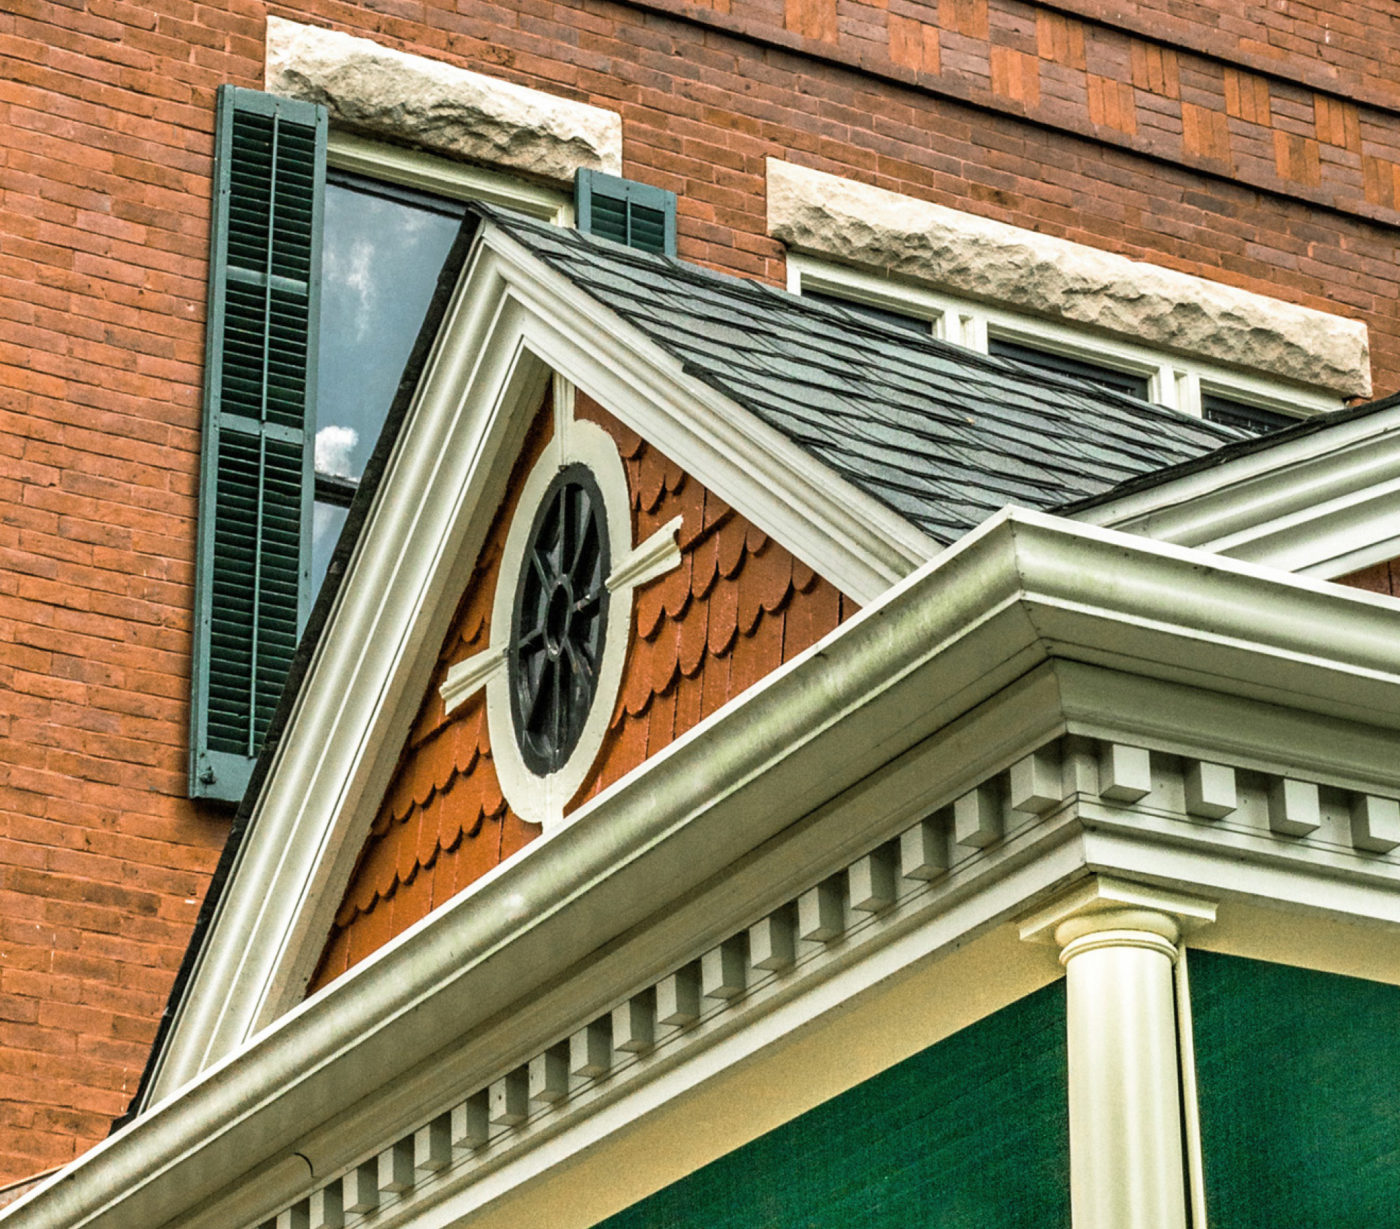 A detail photograph of the pediment of Historic Westwood House.